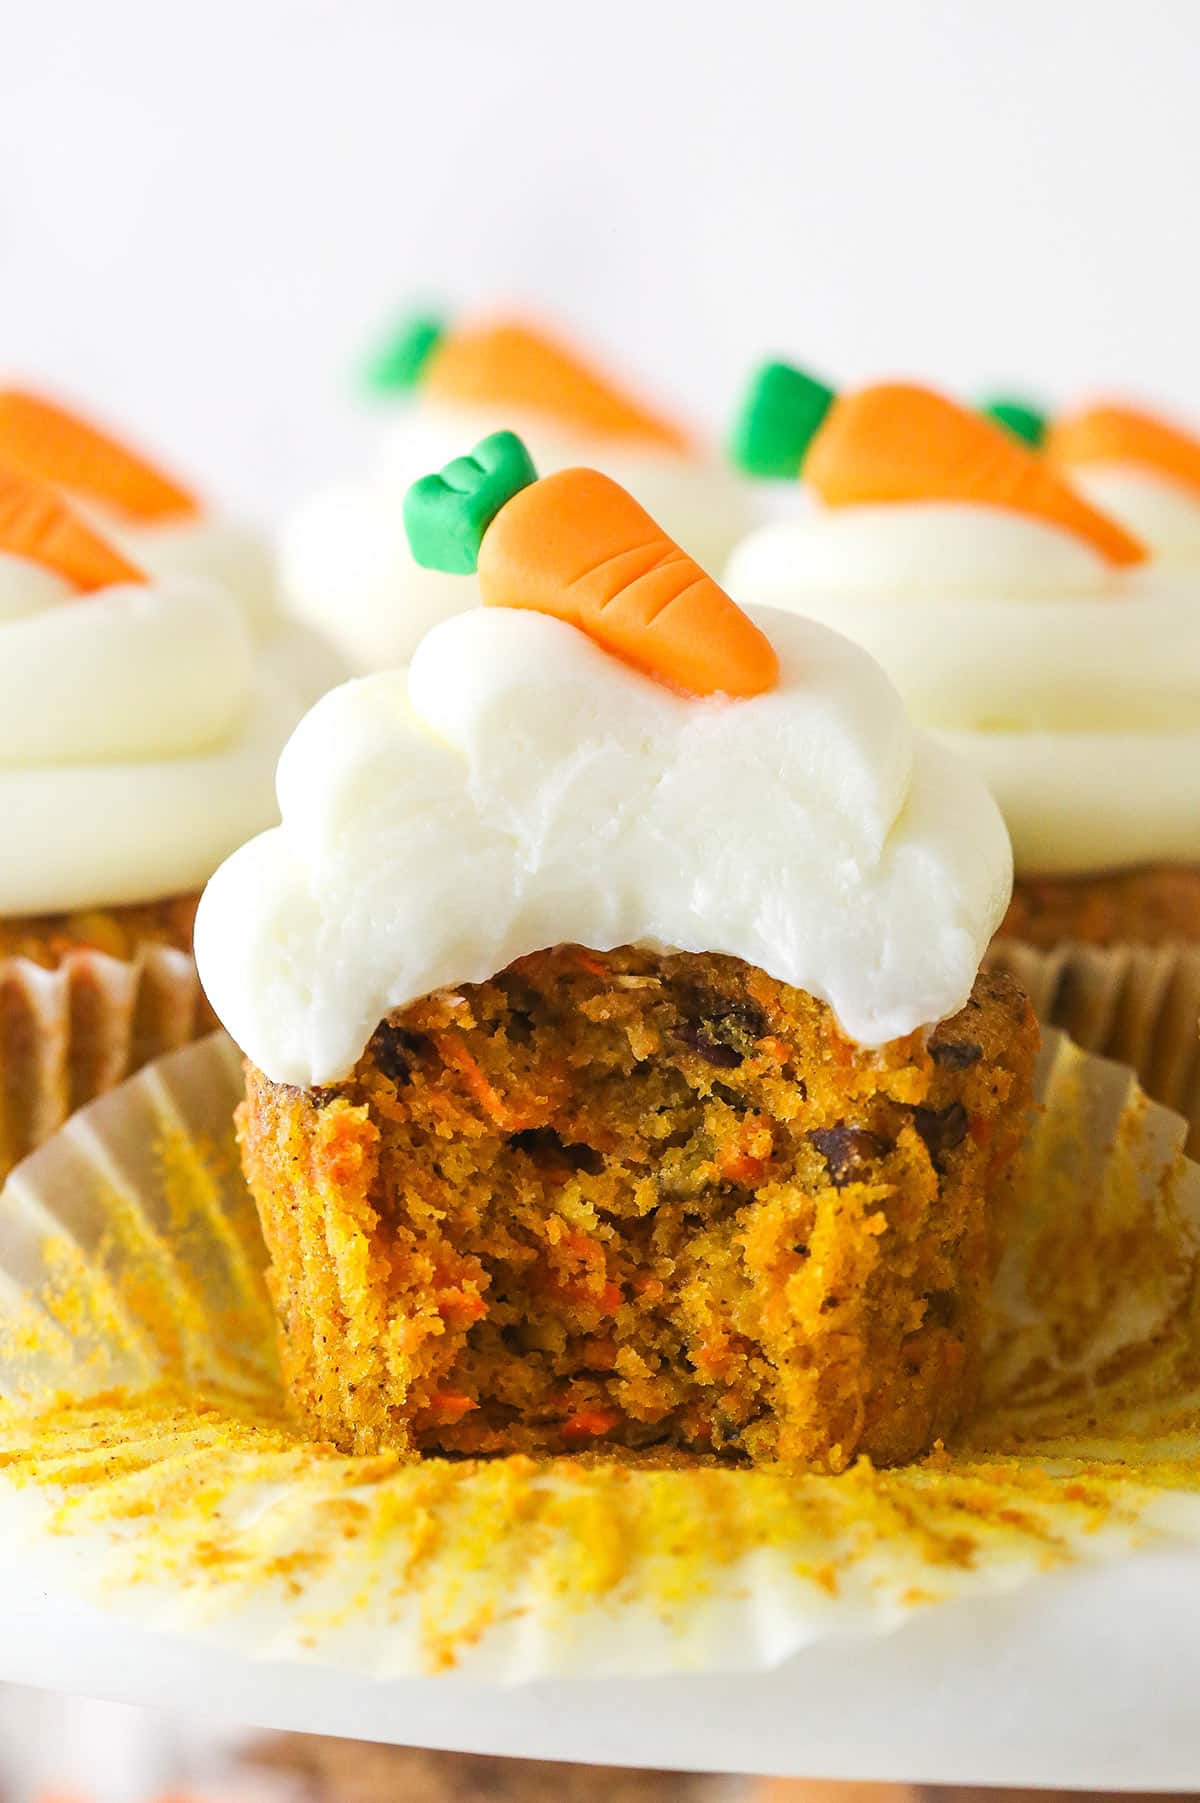 The Best Carrot Cake Cupcakes - A Timeless Classic